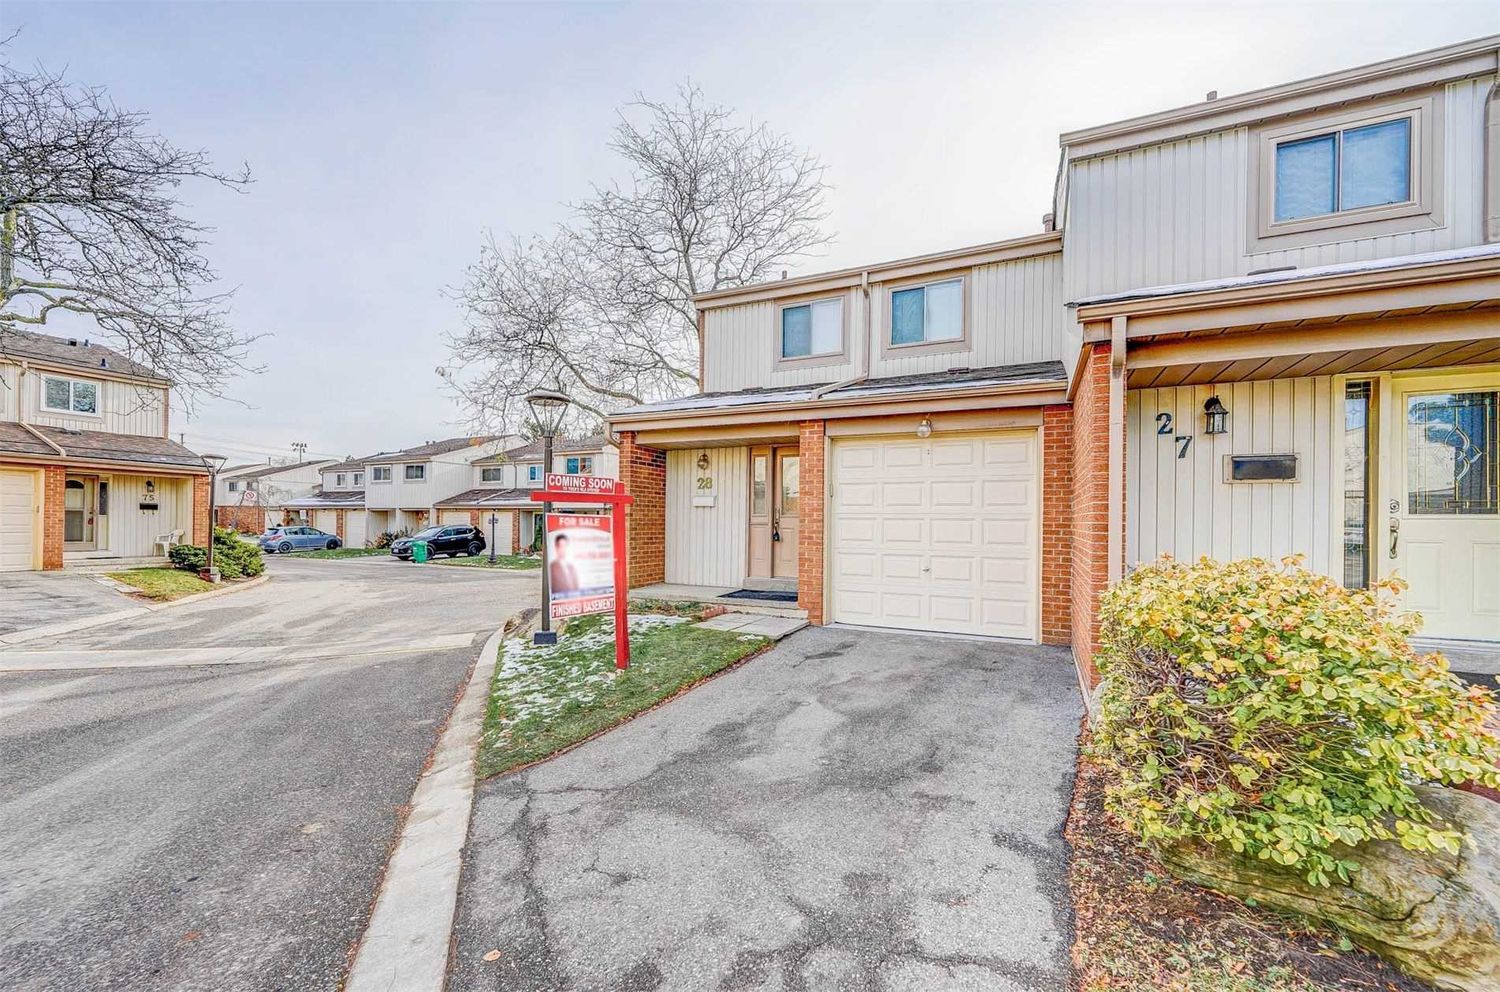 3339 Council Ring Road. 3339 Council Ring Road Townhomes is located in  Mississauga, Toronto - image #1 of 2